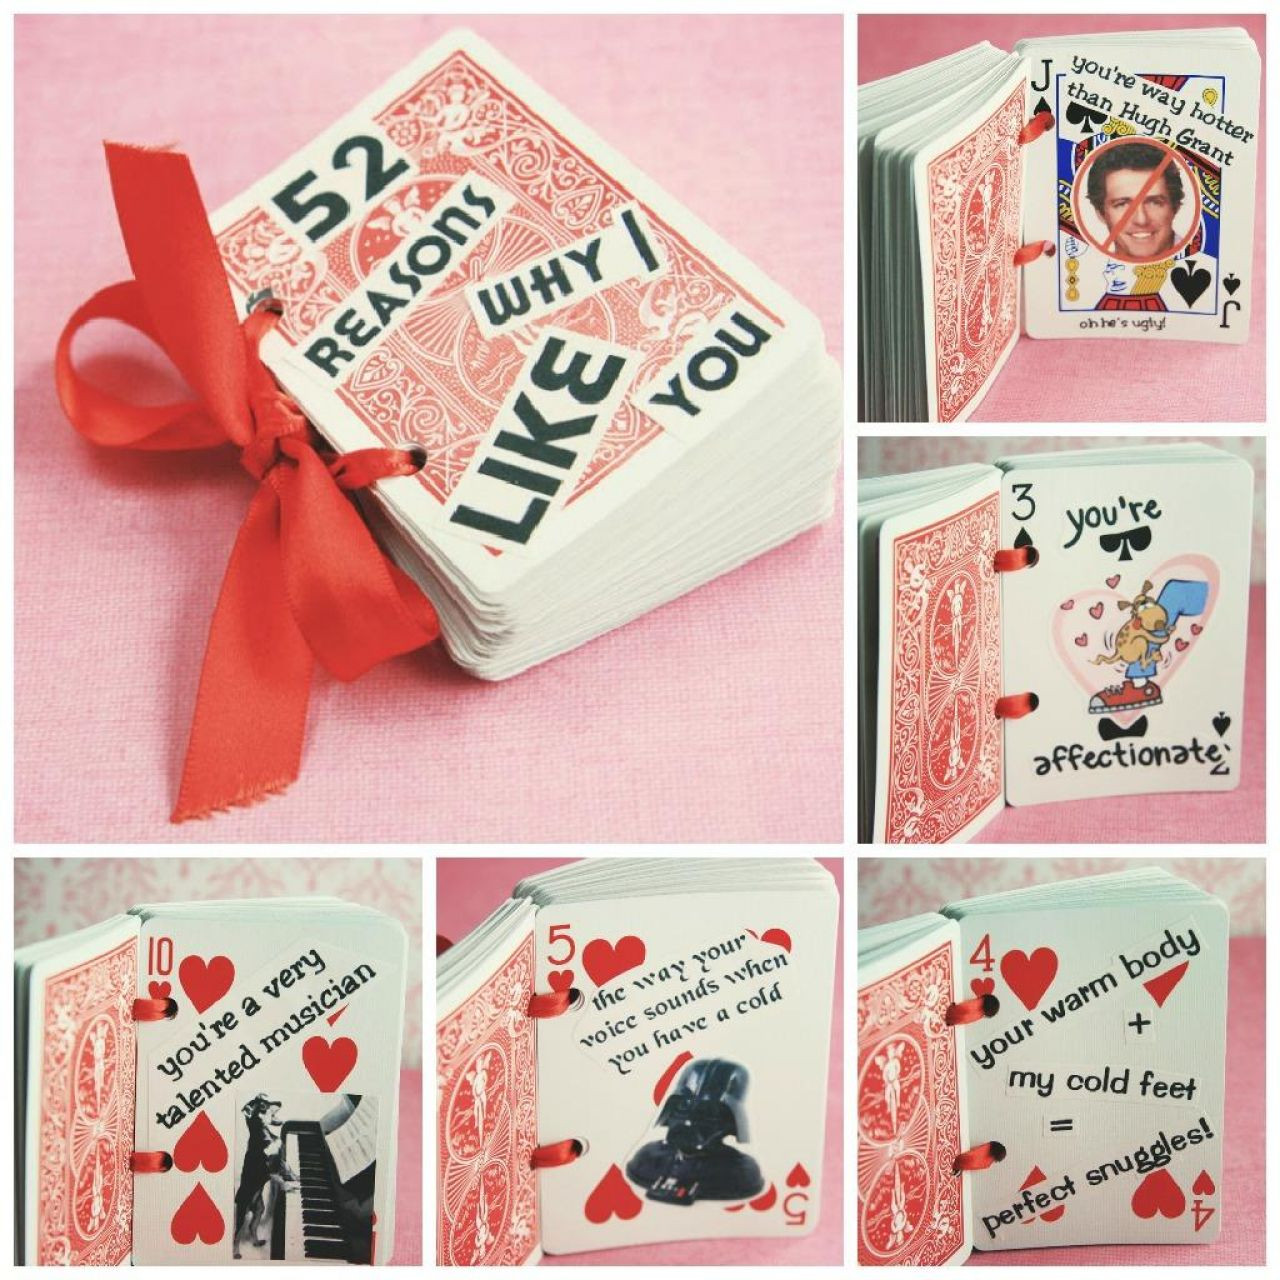 Creative Valentines Gift Ideas For Him
 24 LOVELY VALENTINE S DAY GIFTS FOR YOUR BOYFRIEND